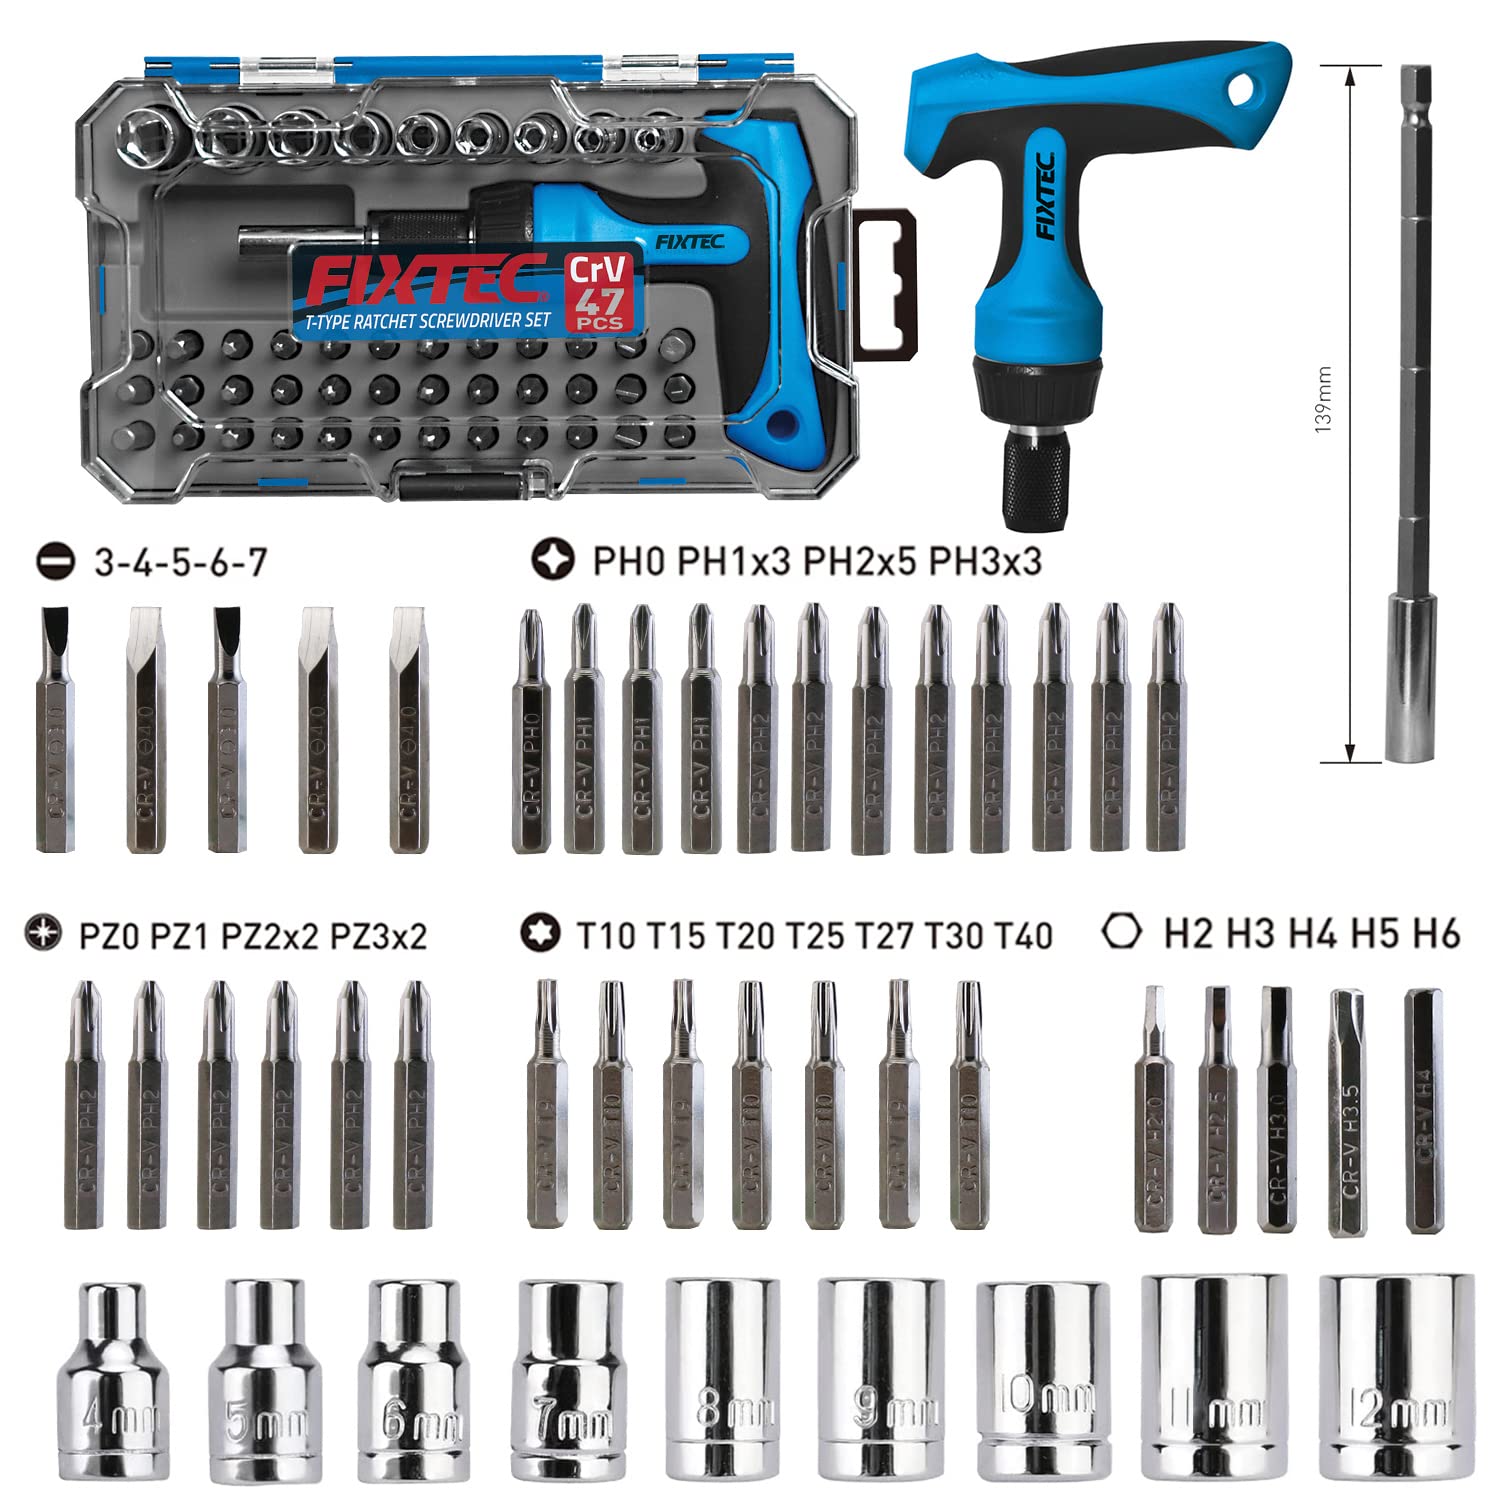 FIXTEC 47-Piece Magnetic T-Handle Ratchet Wrench and Screwdriver Set,Repair Tool Kit for Electric Appliances and Home Improvement